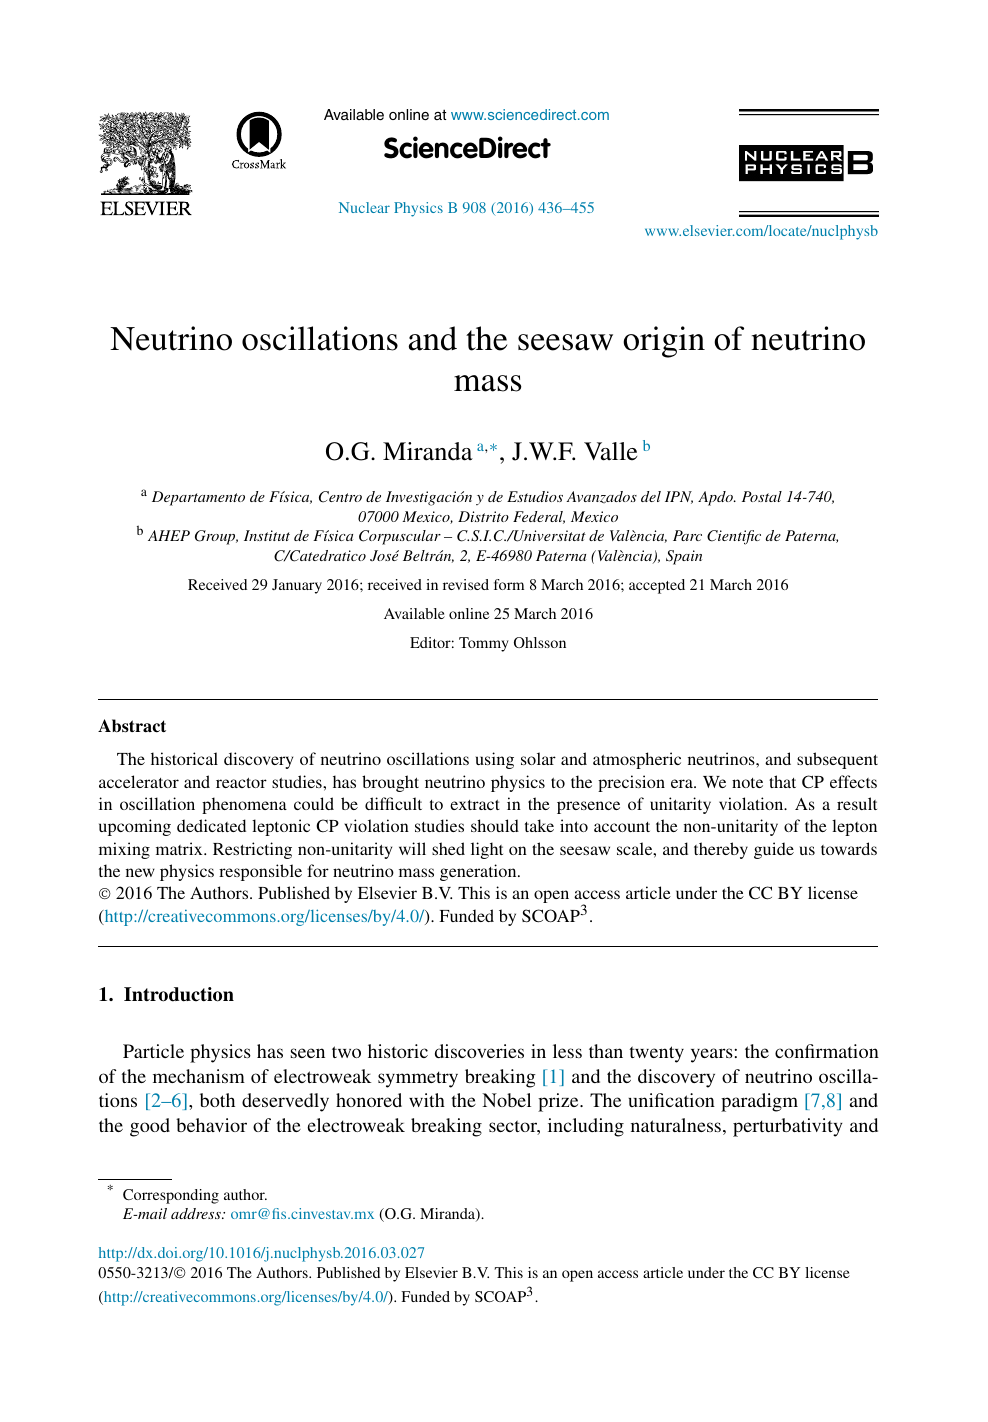 Neutrino Oscillations And The Seesaw Origin Of Neutrino Mass Topic Of Research Paper In Physical Sciences Download Scholarly Article Pdf And Read For Free On Cyberleninka Open Science Hub